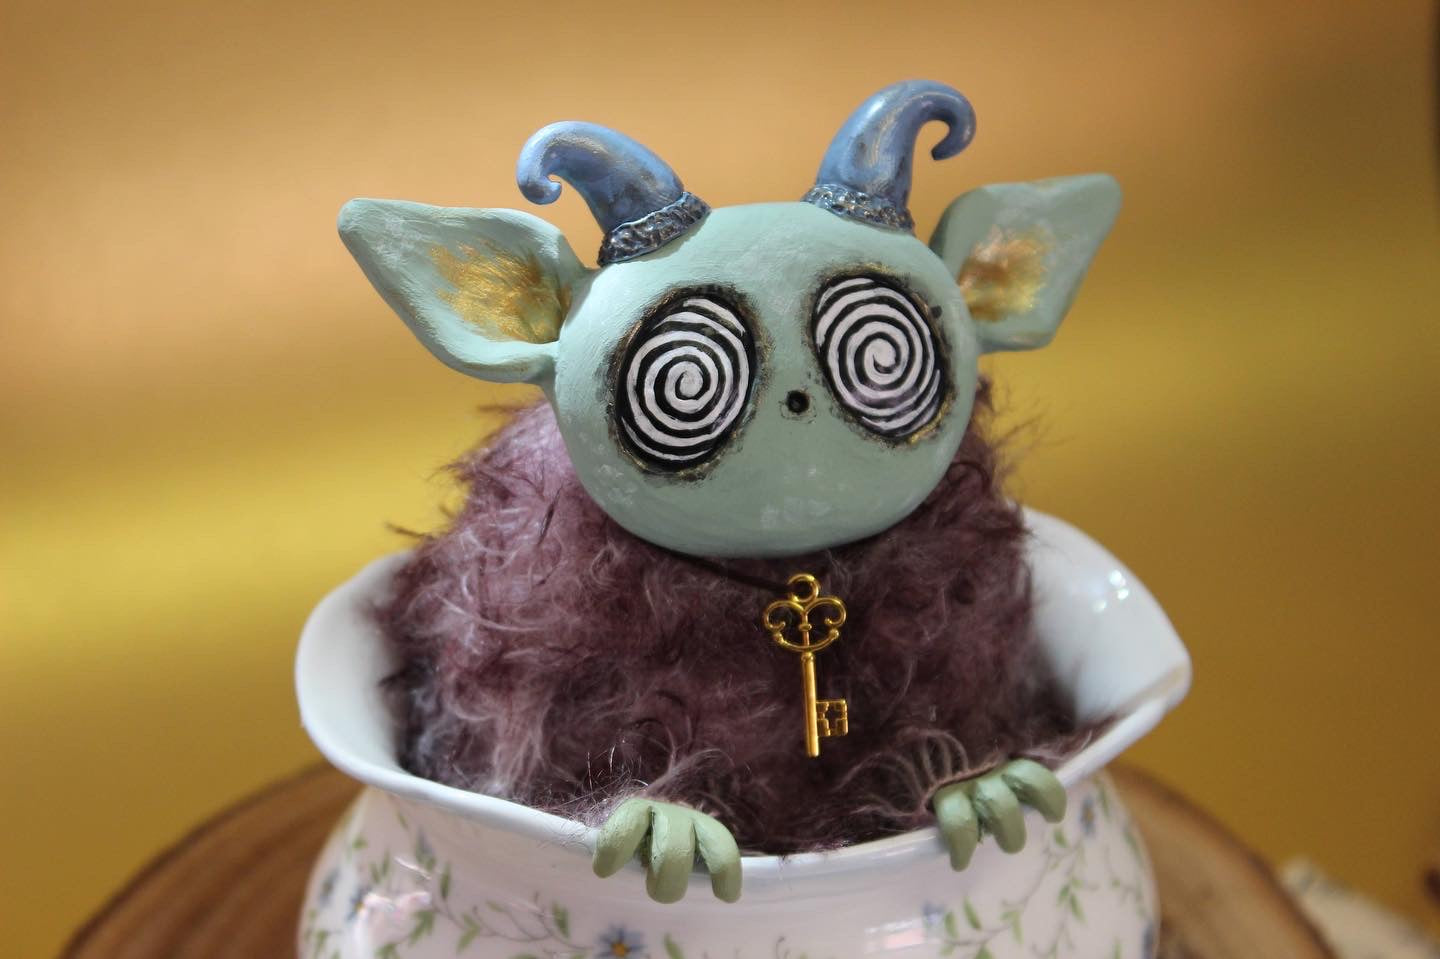 Agnes the Teacup Critter